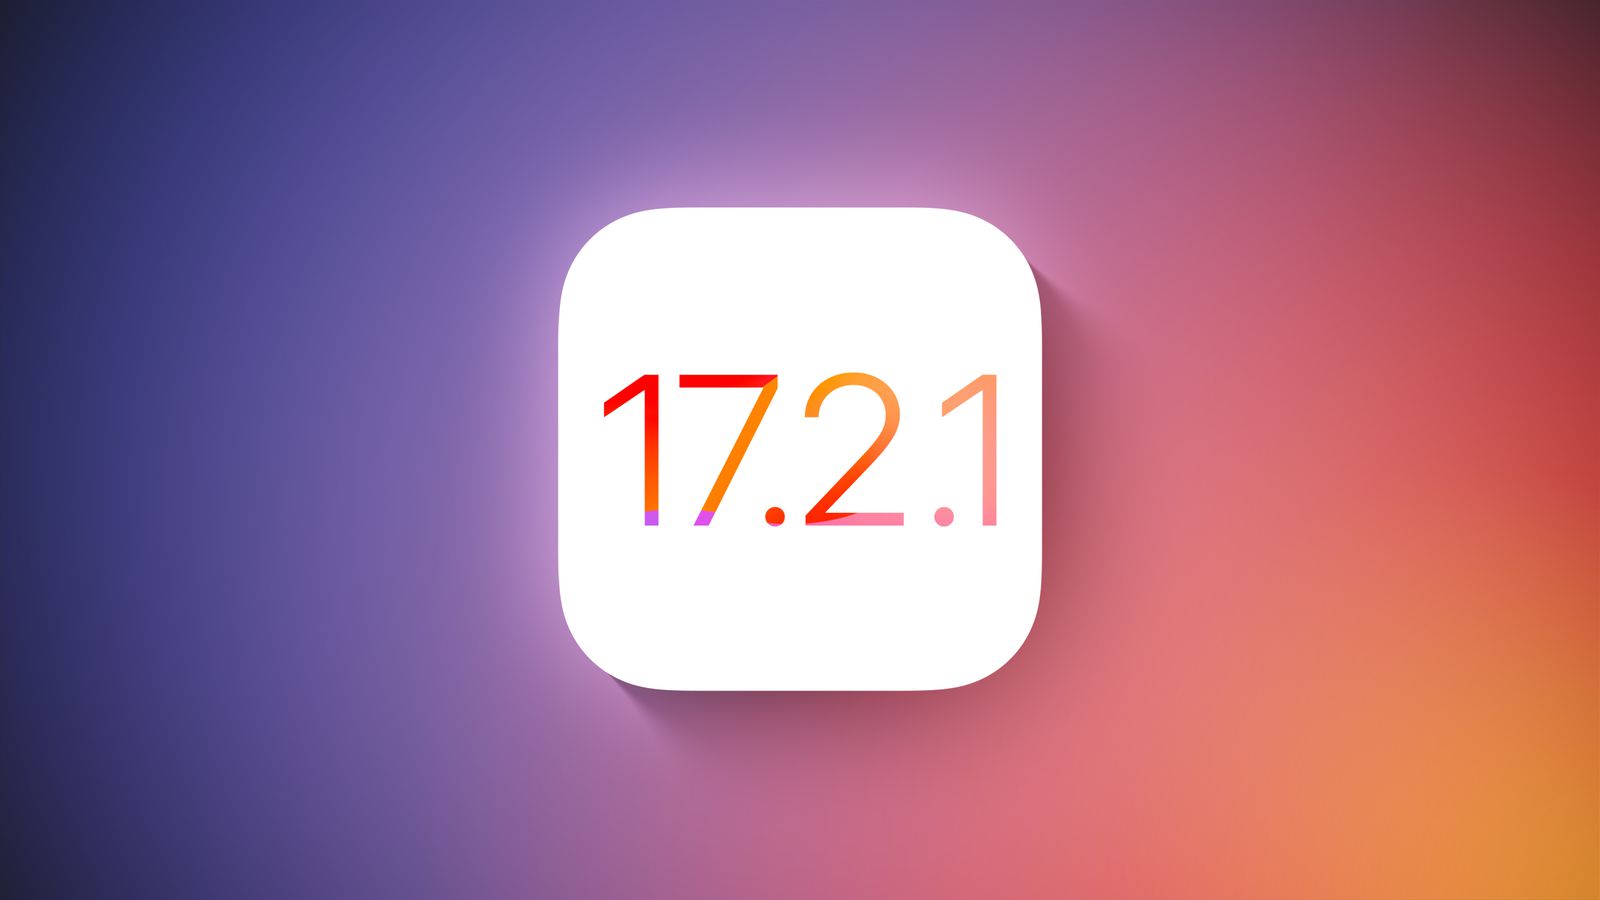 iOS 17.2.1 rolls out with mysterious bug fixes